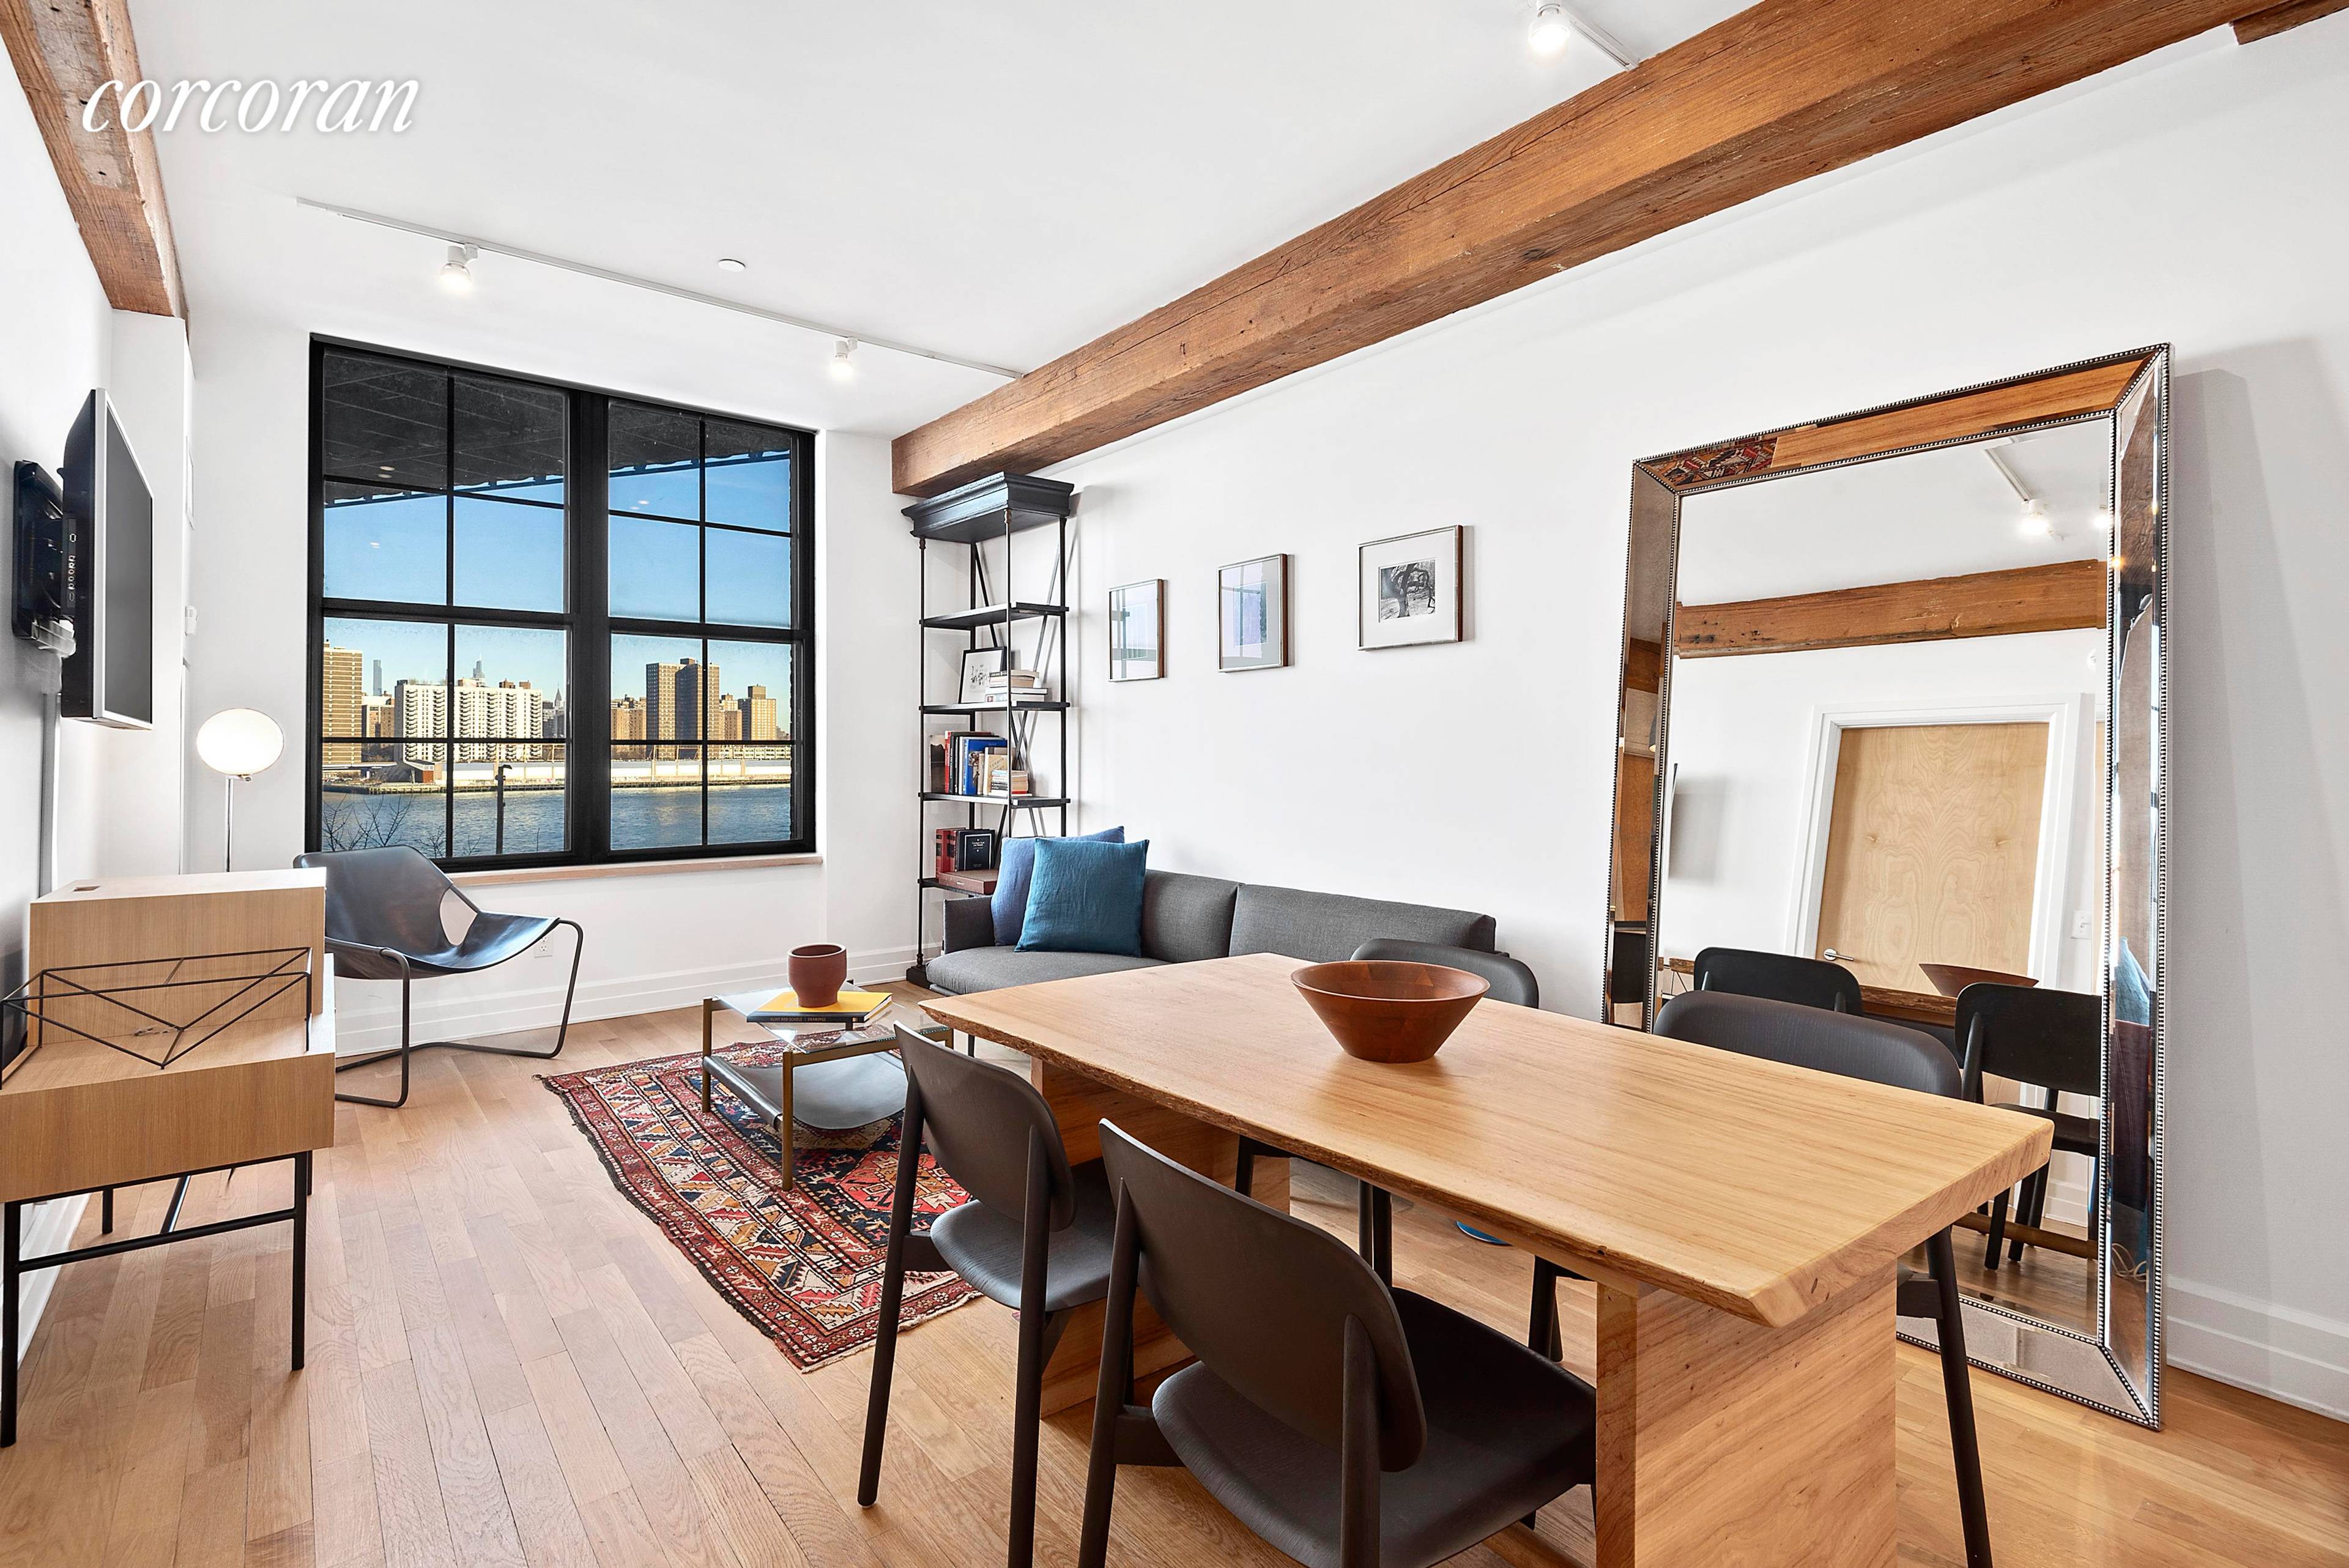 25 Washington Street 5D SHORT TERM SUBLET 25 Washington Street 5D is a bright amp ; sunny 2 bedroom in one of the most desirable buildings in DUMBO.